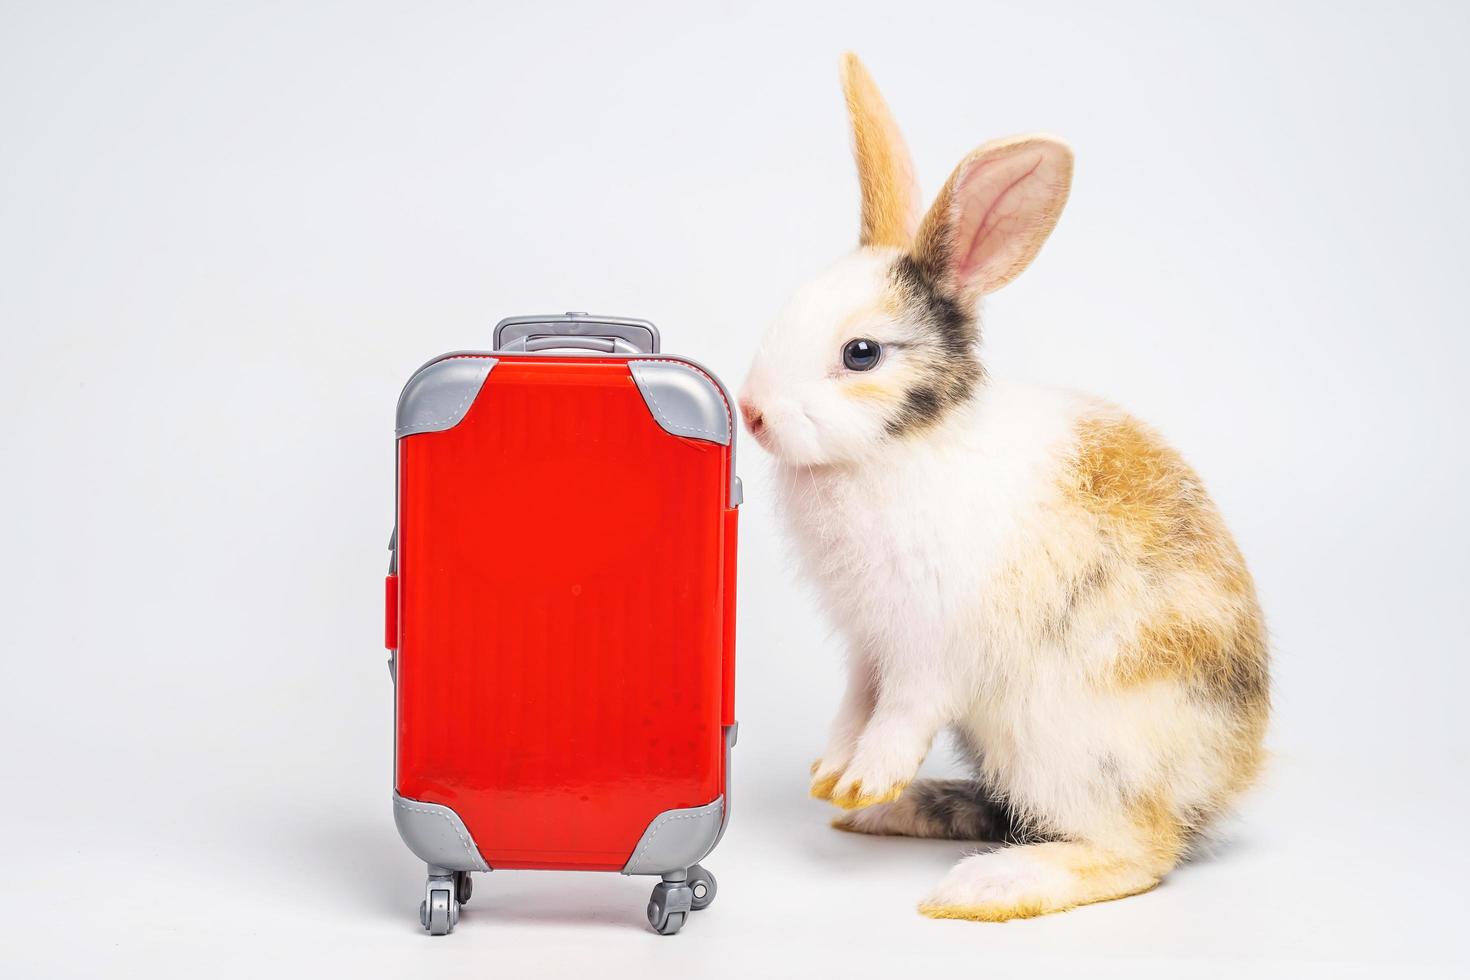 A small adorable bunny or rabbit traveler with red luggage with airplane, going on vacation. Travel concept on white background. photo